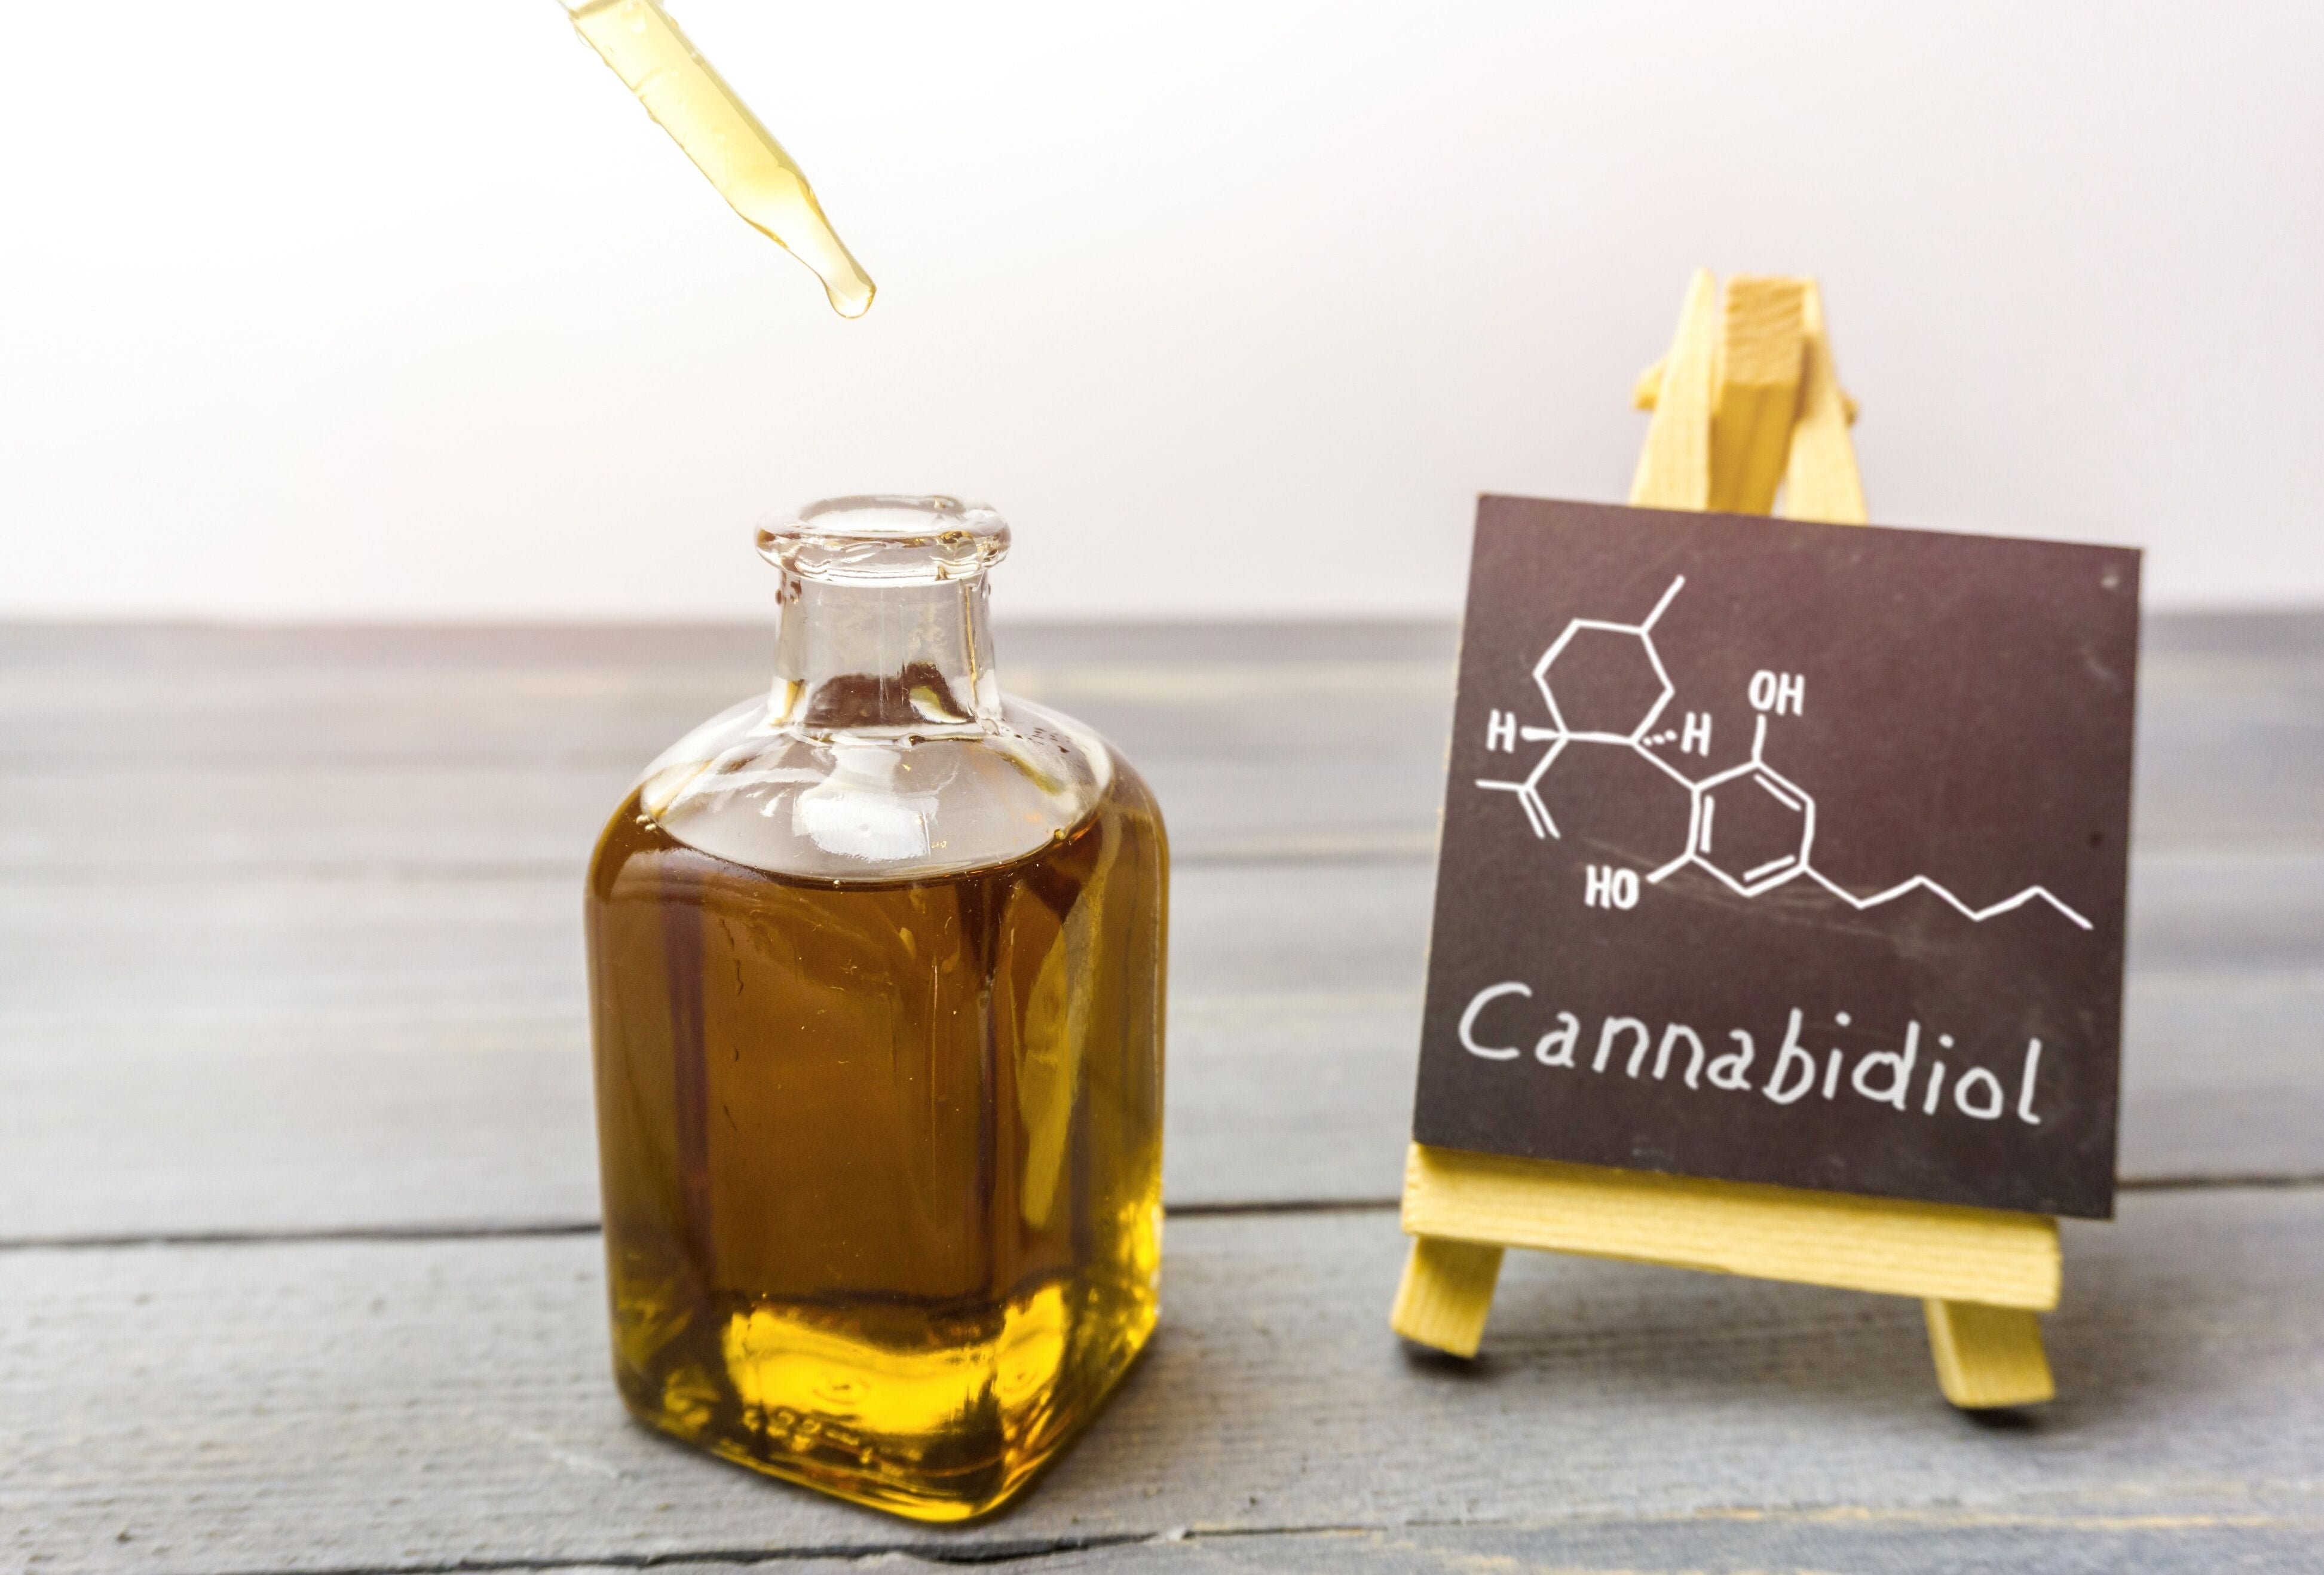 New CBD analog shows promise as a potent pain reliever